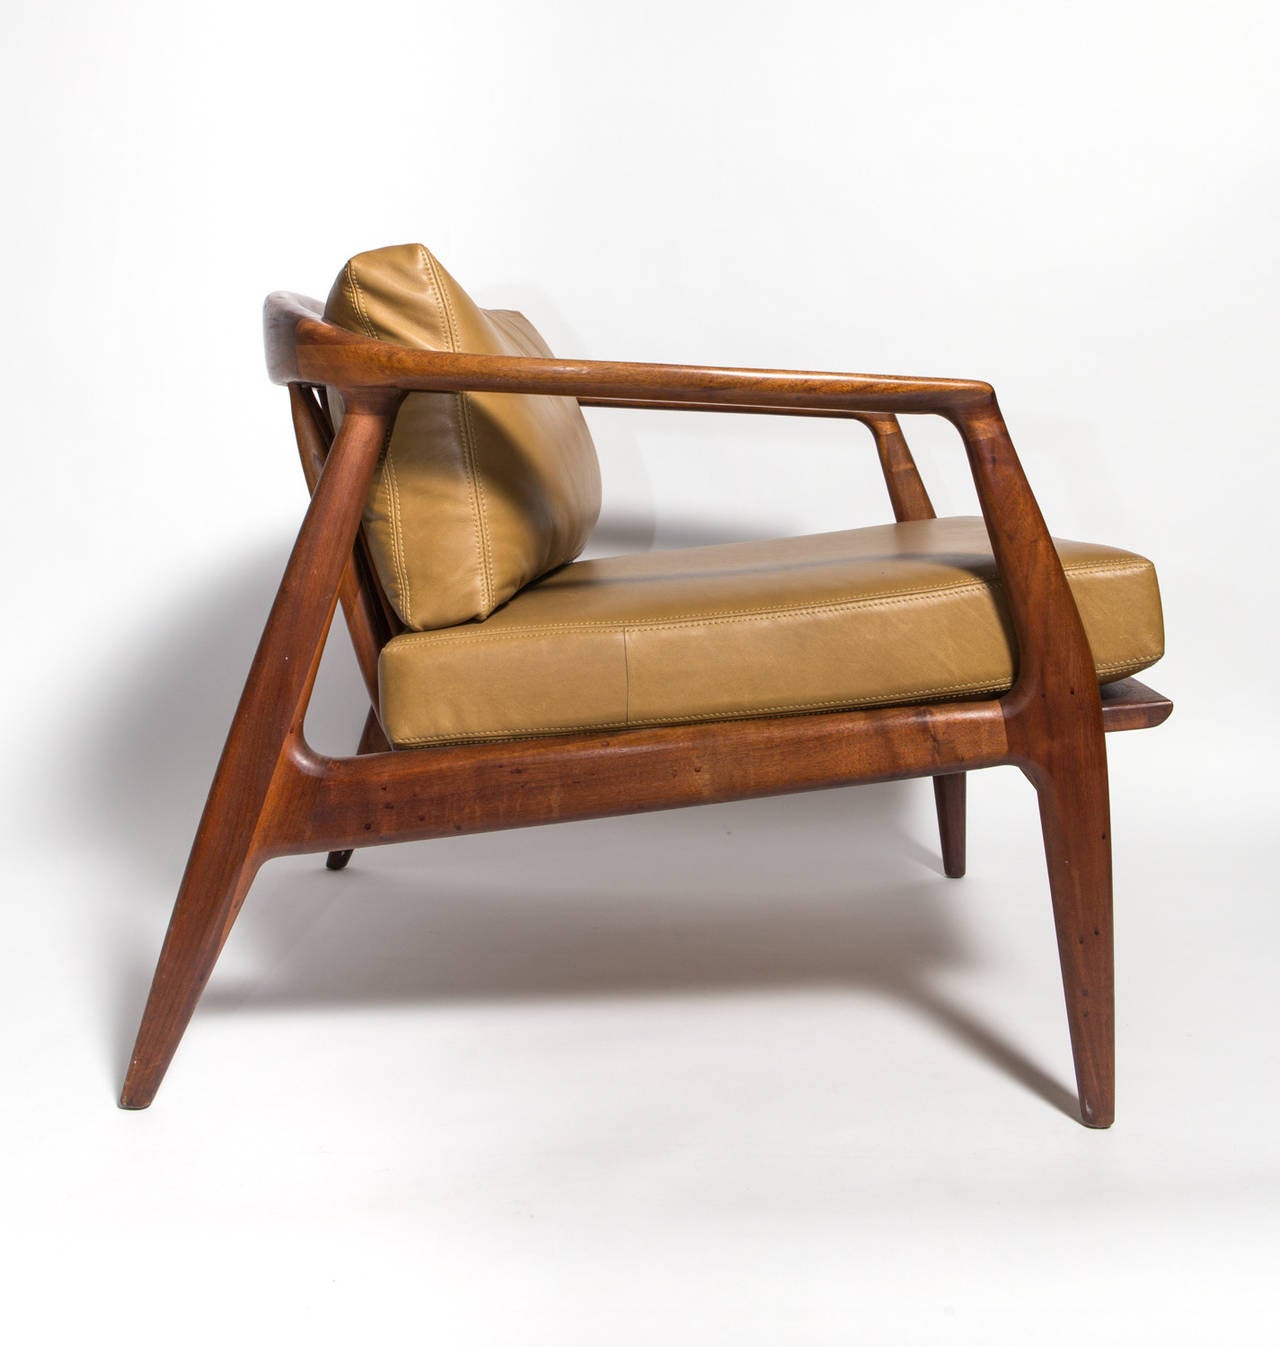 Milo Baughman leather and walnut lounge chair, 1960s, manufactured by Thayer Coggin. Leather color is a mustard tone with double stitching.